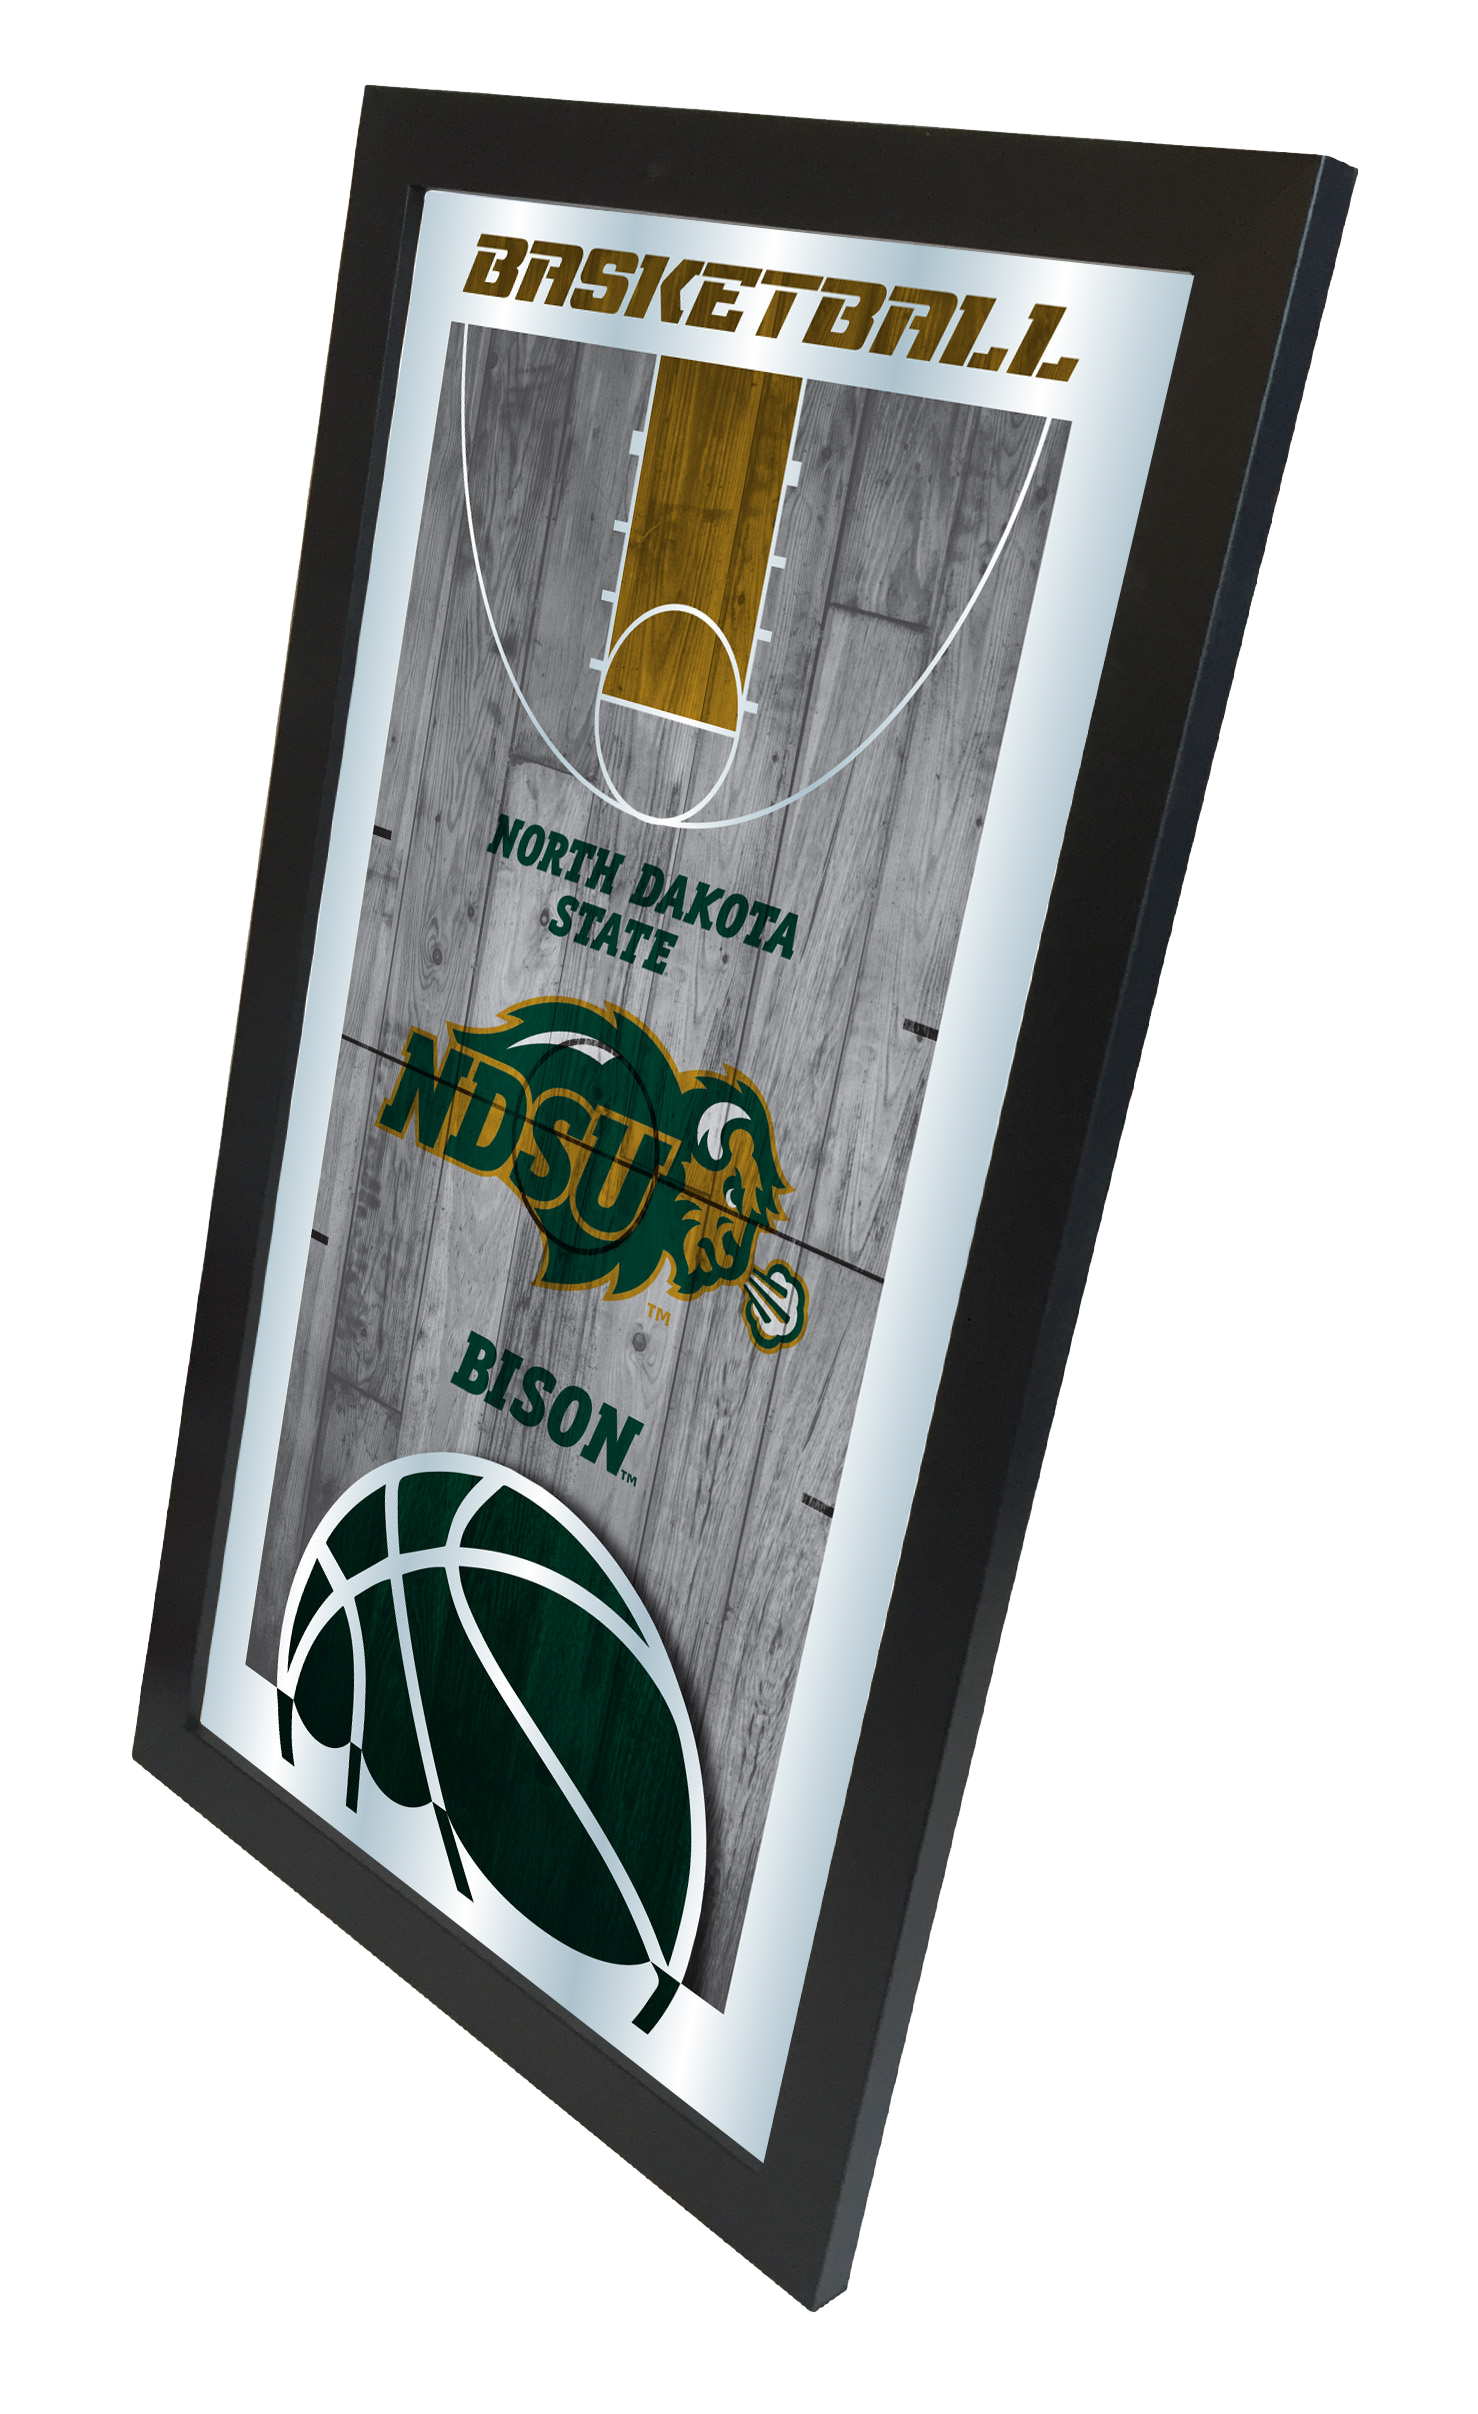 North Dakota State University Bison logo on a basketball court design mirror, captured at an angled perspective.